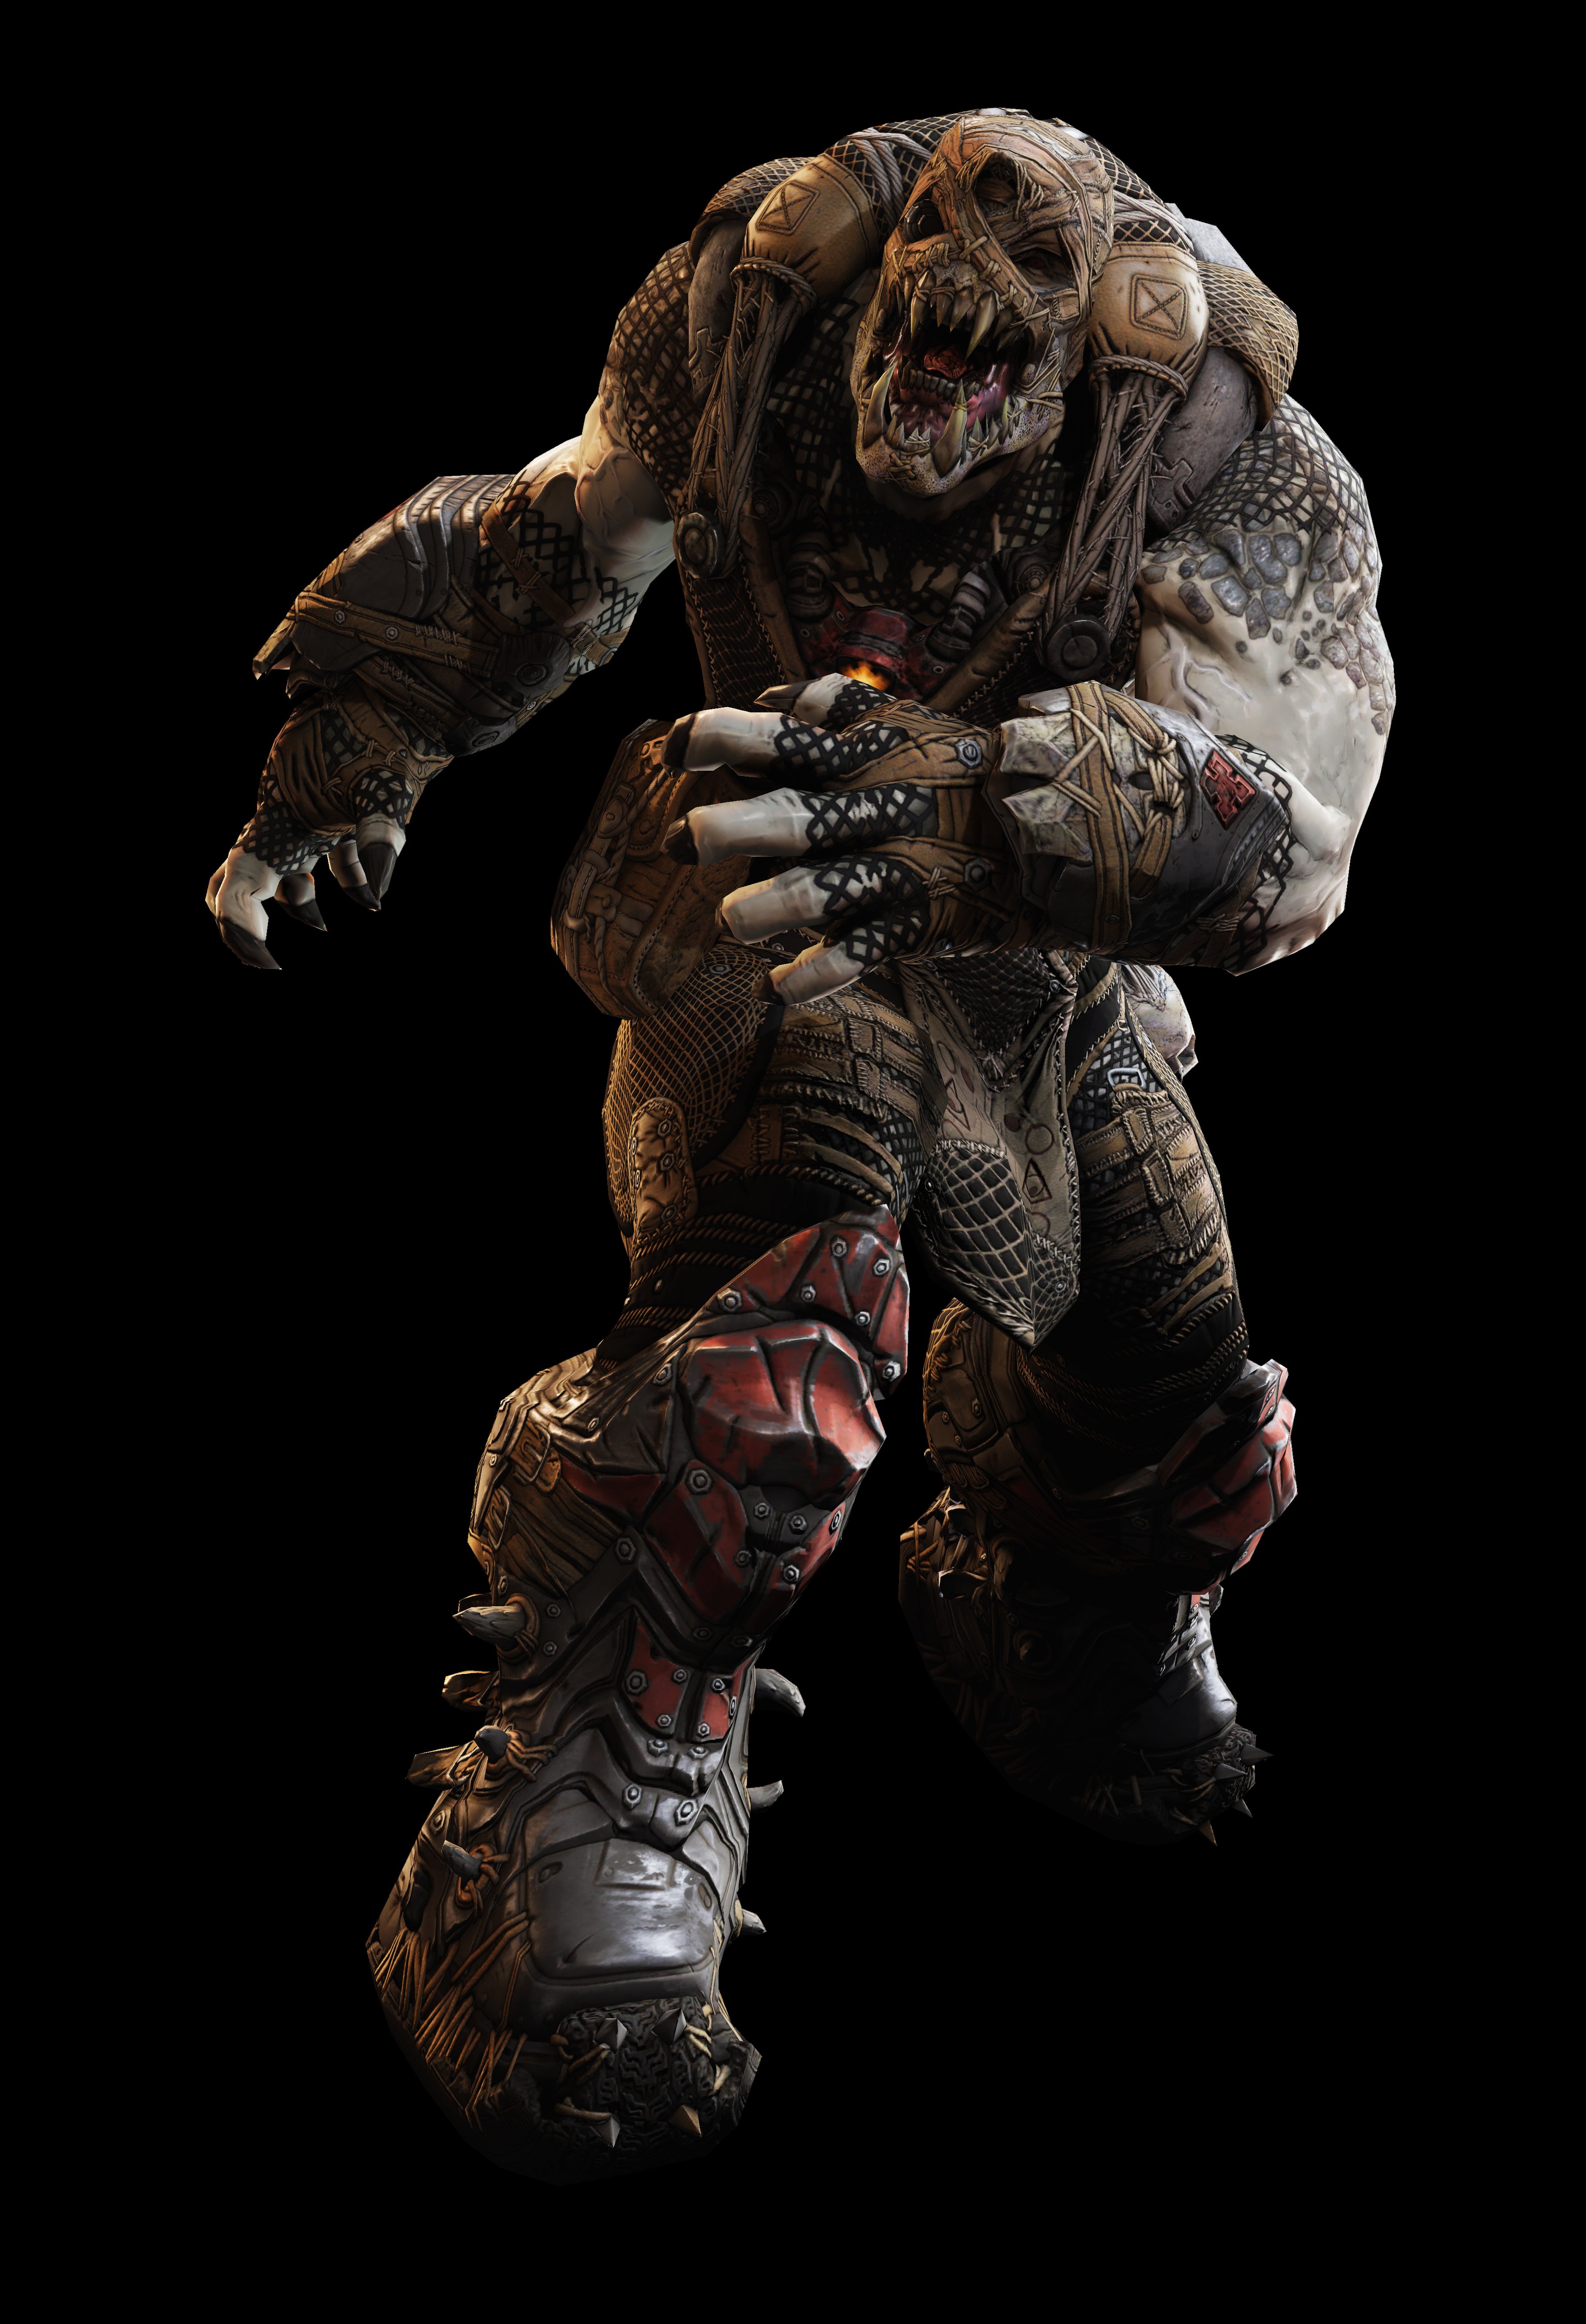 New 'Gears of War 3' map pack announced